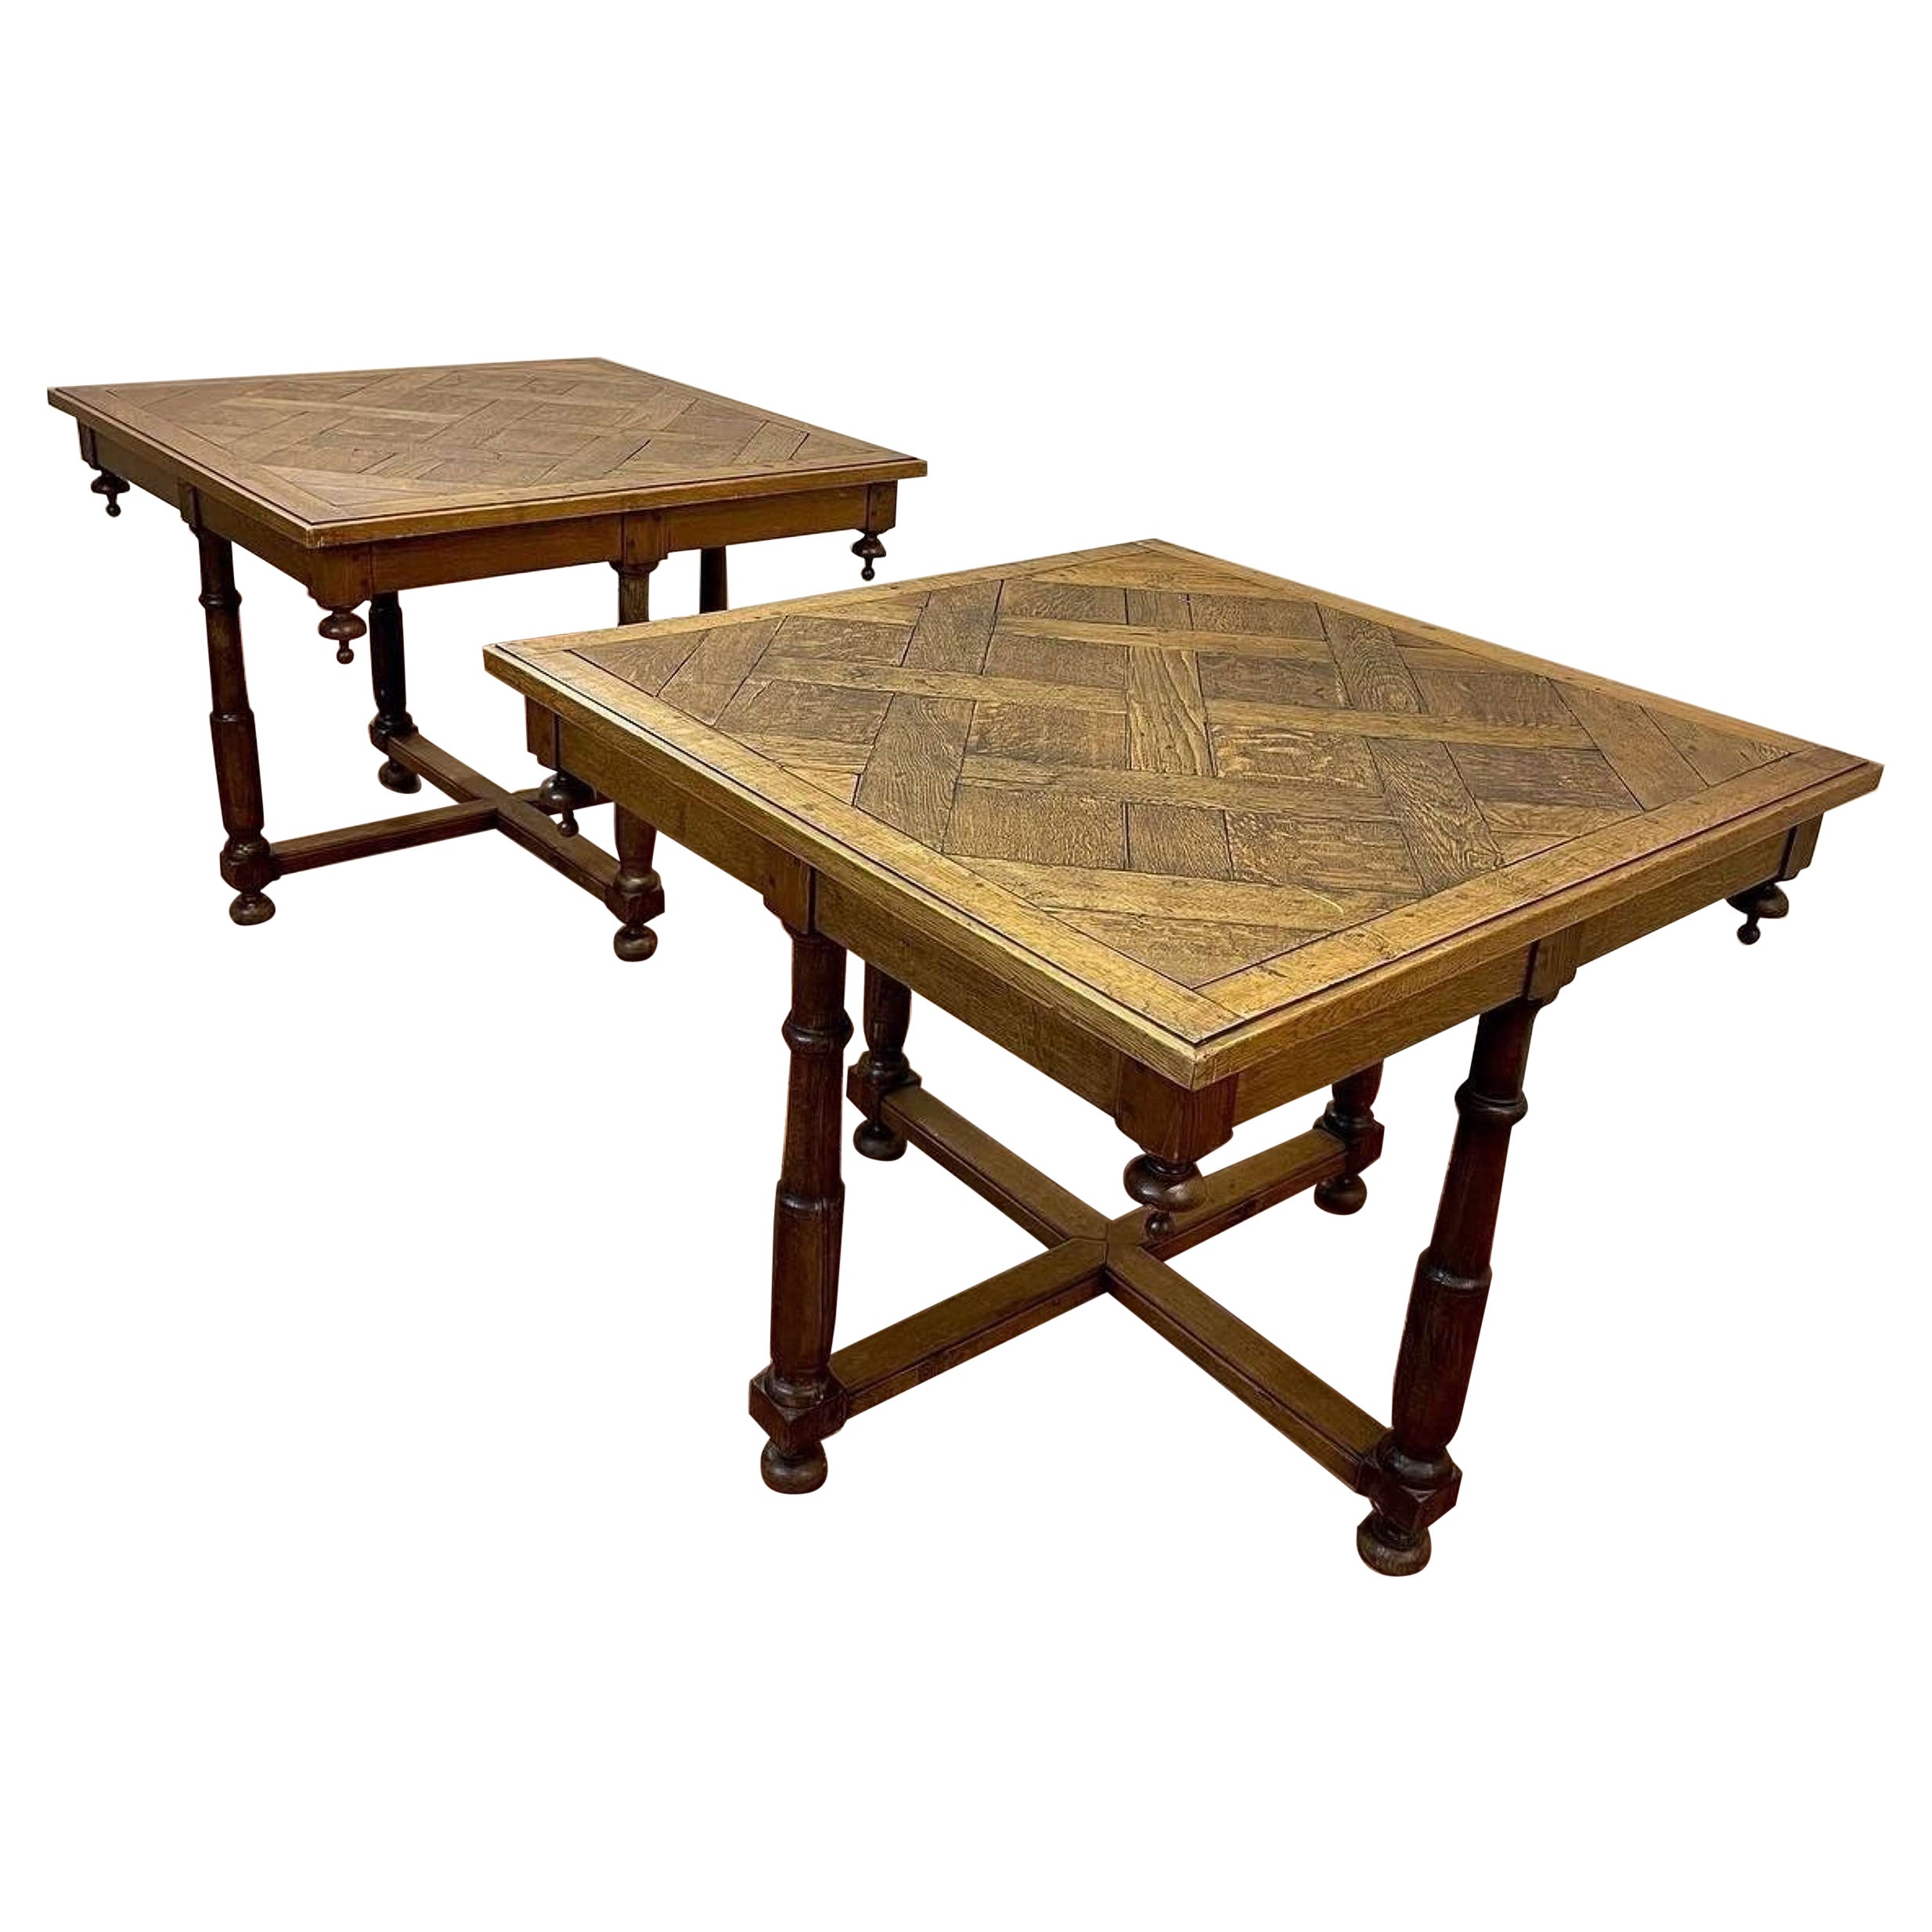  French Parquetry Tables, c1900